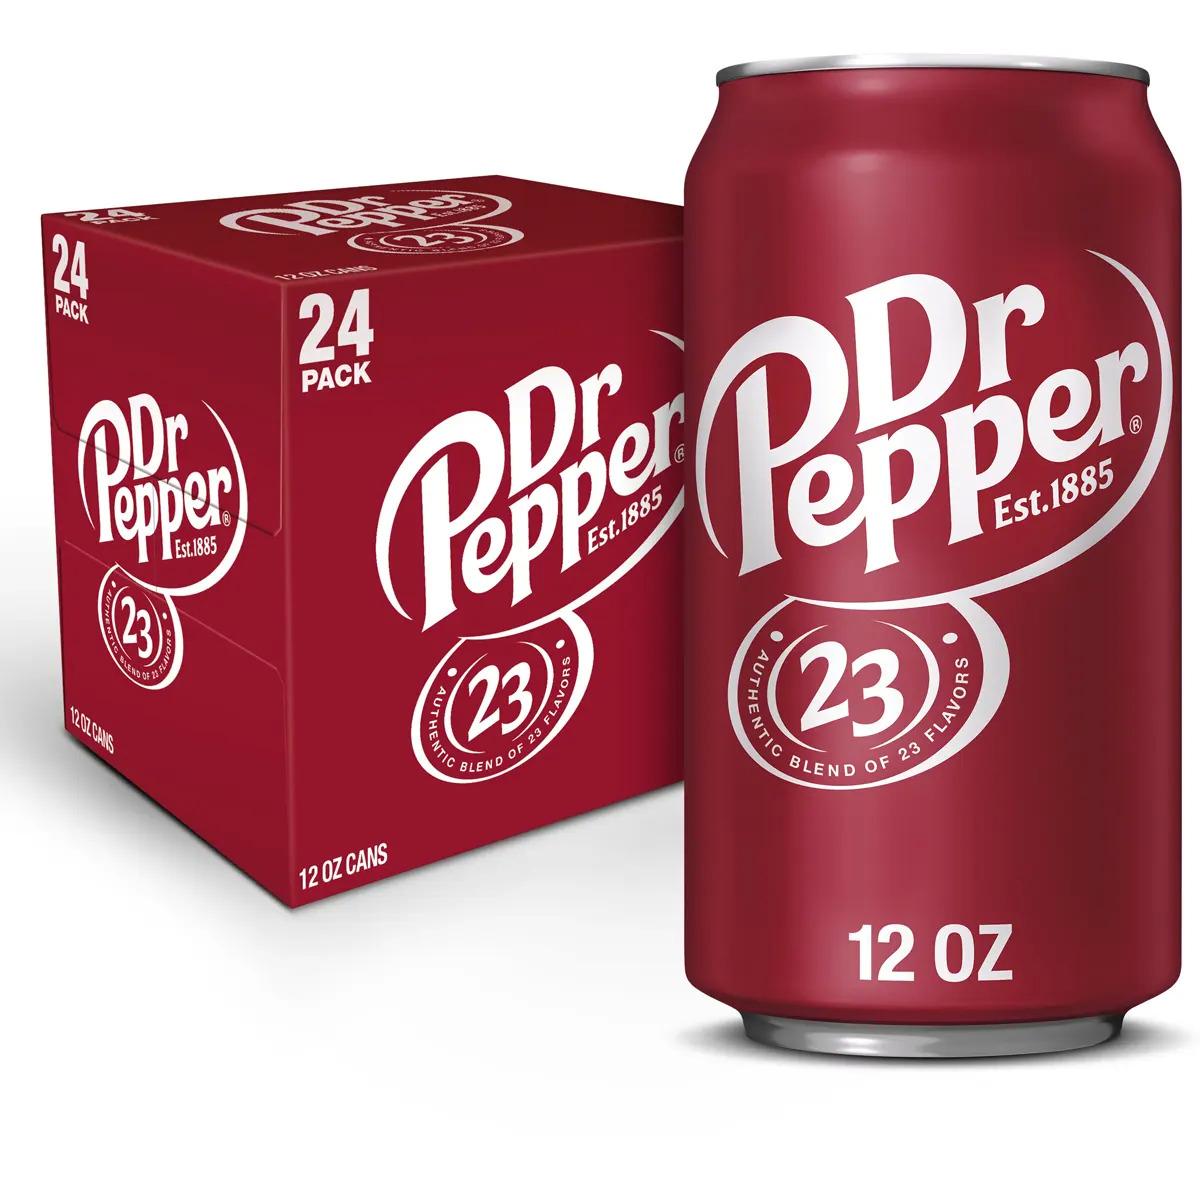 36 Cans of Dr Pepper or 7up or Ginger Ale for $10